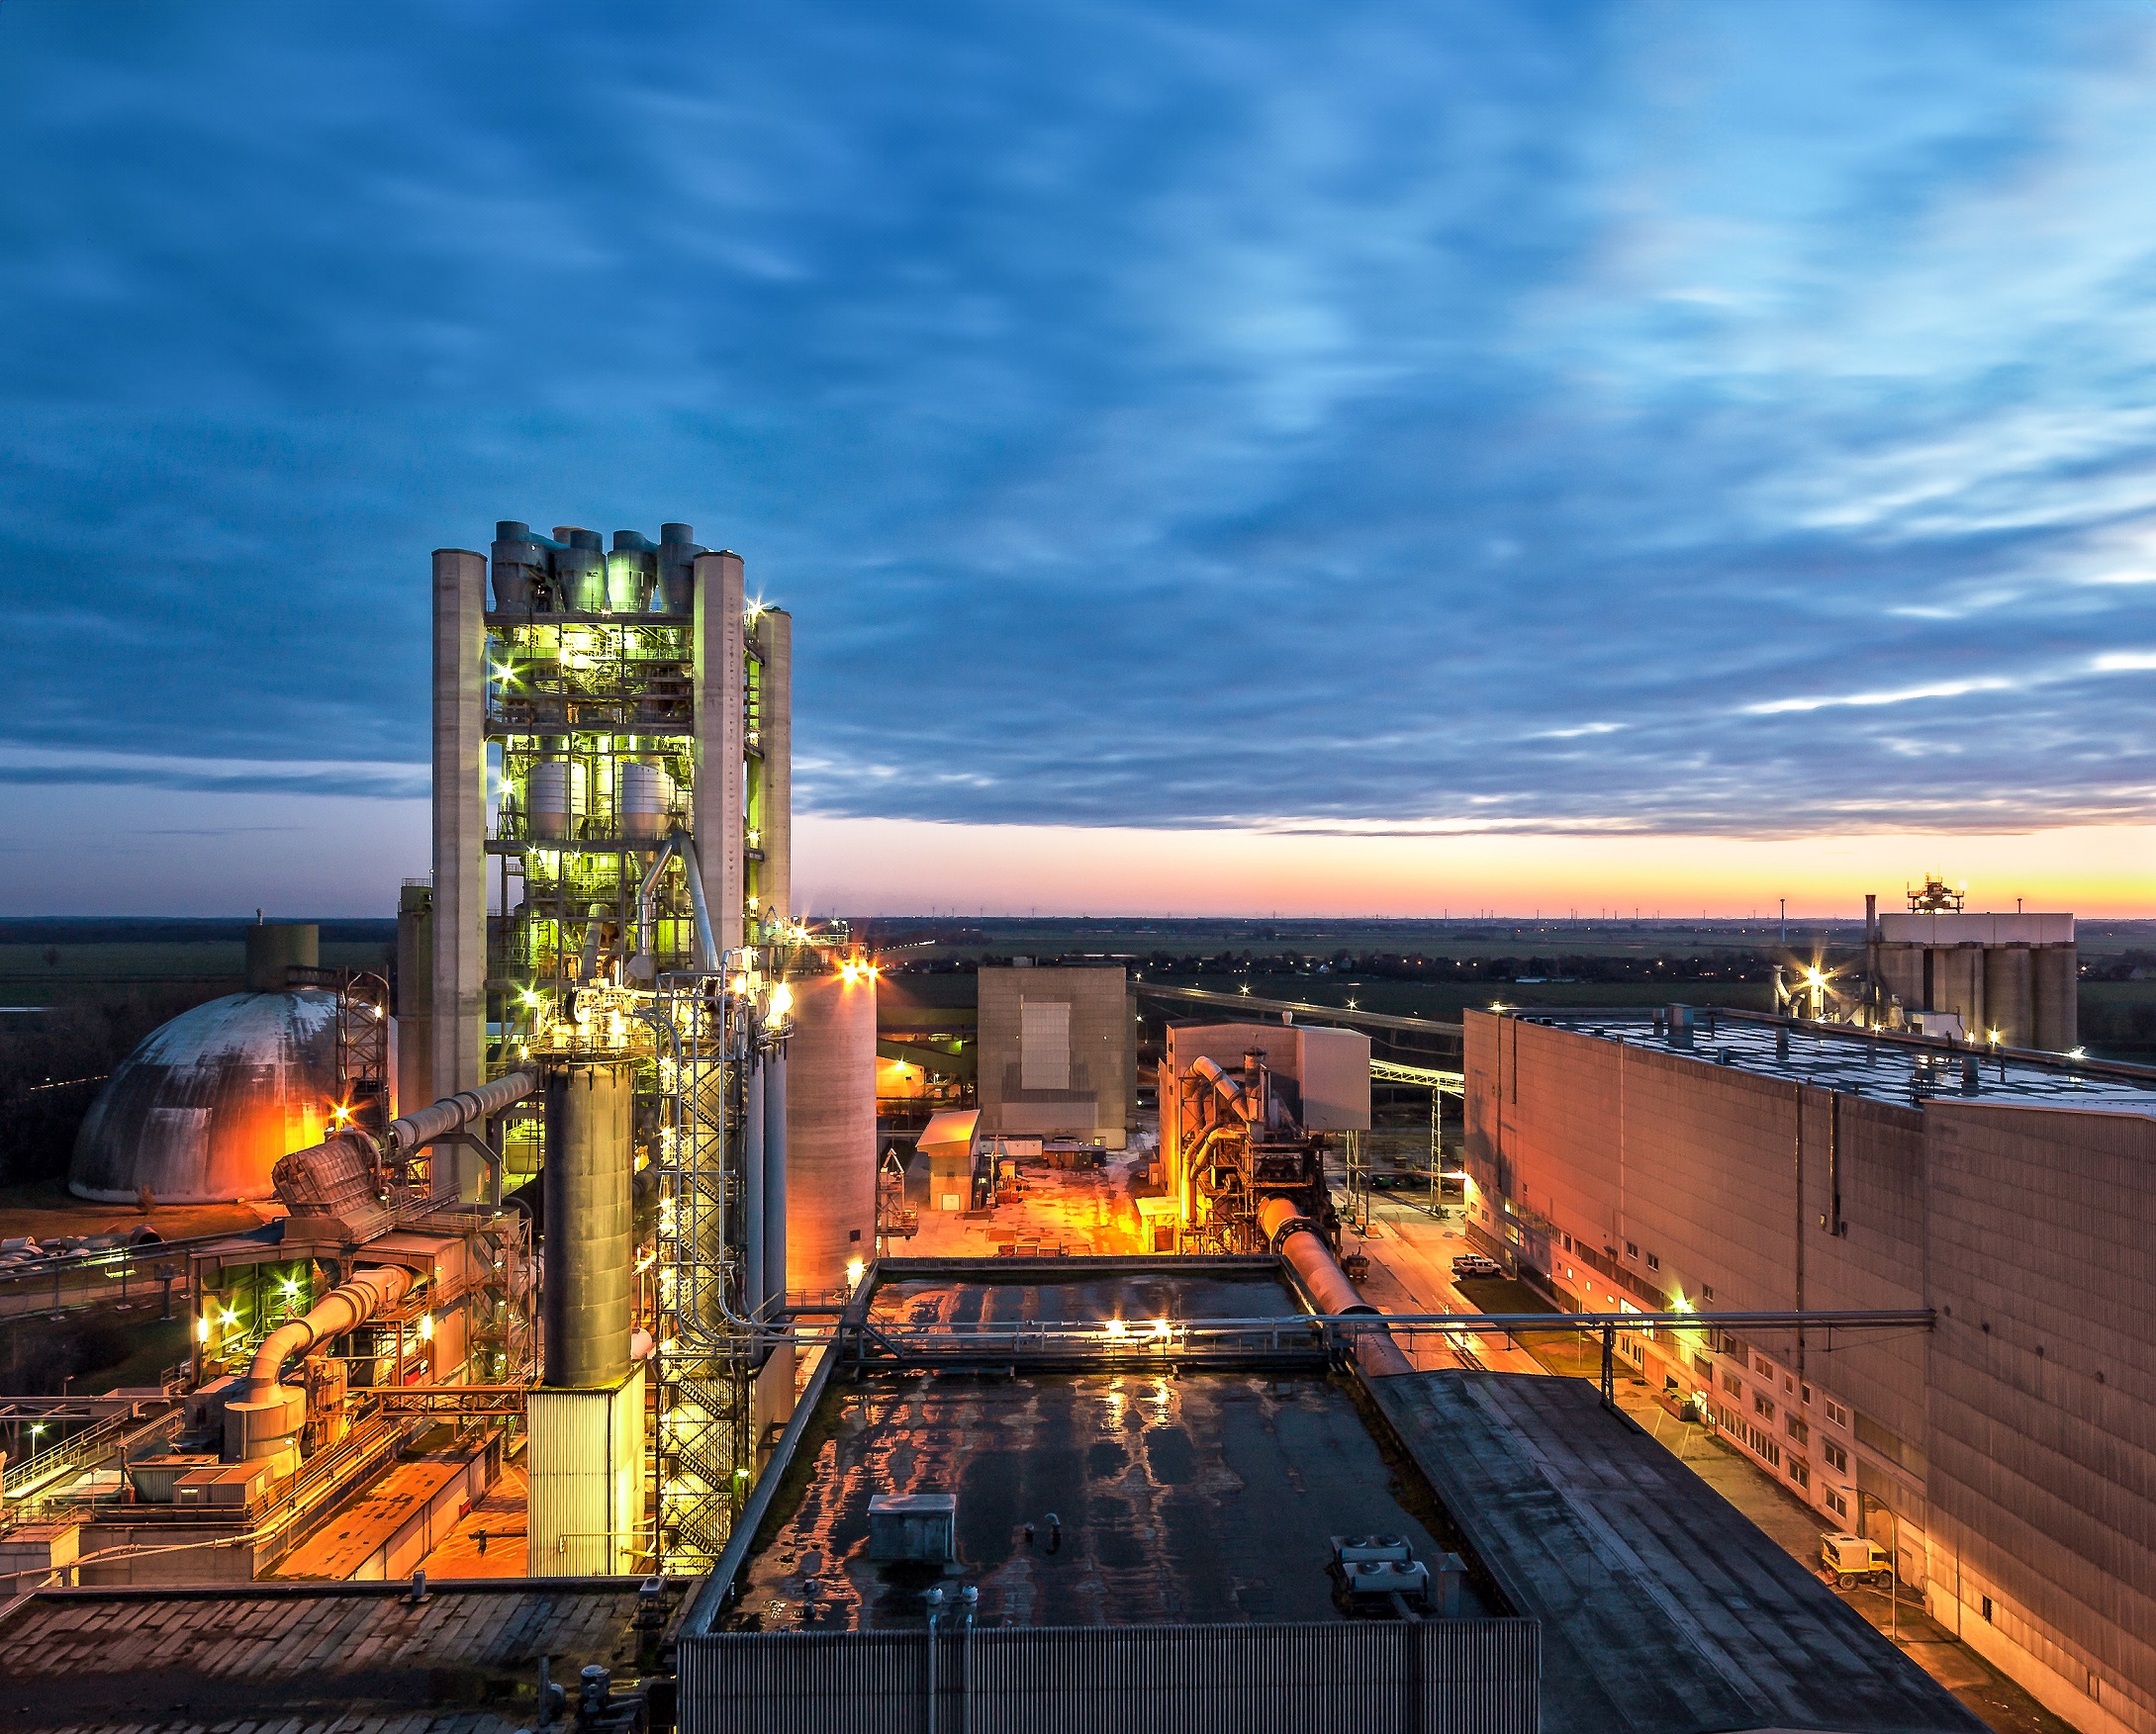 At the Lägerdorf works, a new kiln line is being built to use innovative oxyfuel technology. The flue stream from incinerating cement clinker in this process is made up almost entirely of ultrapure CO2.